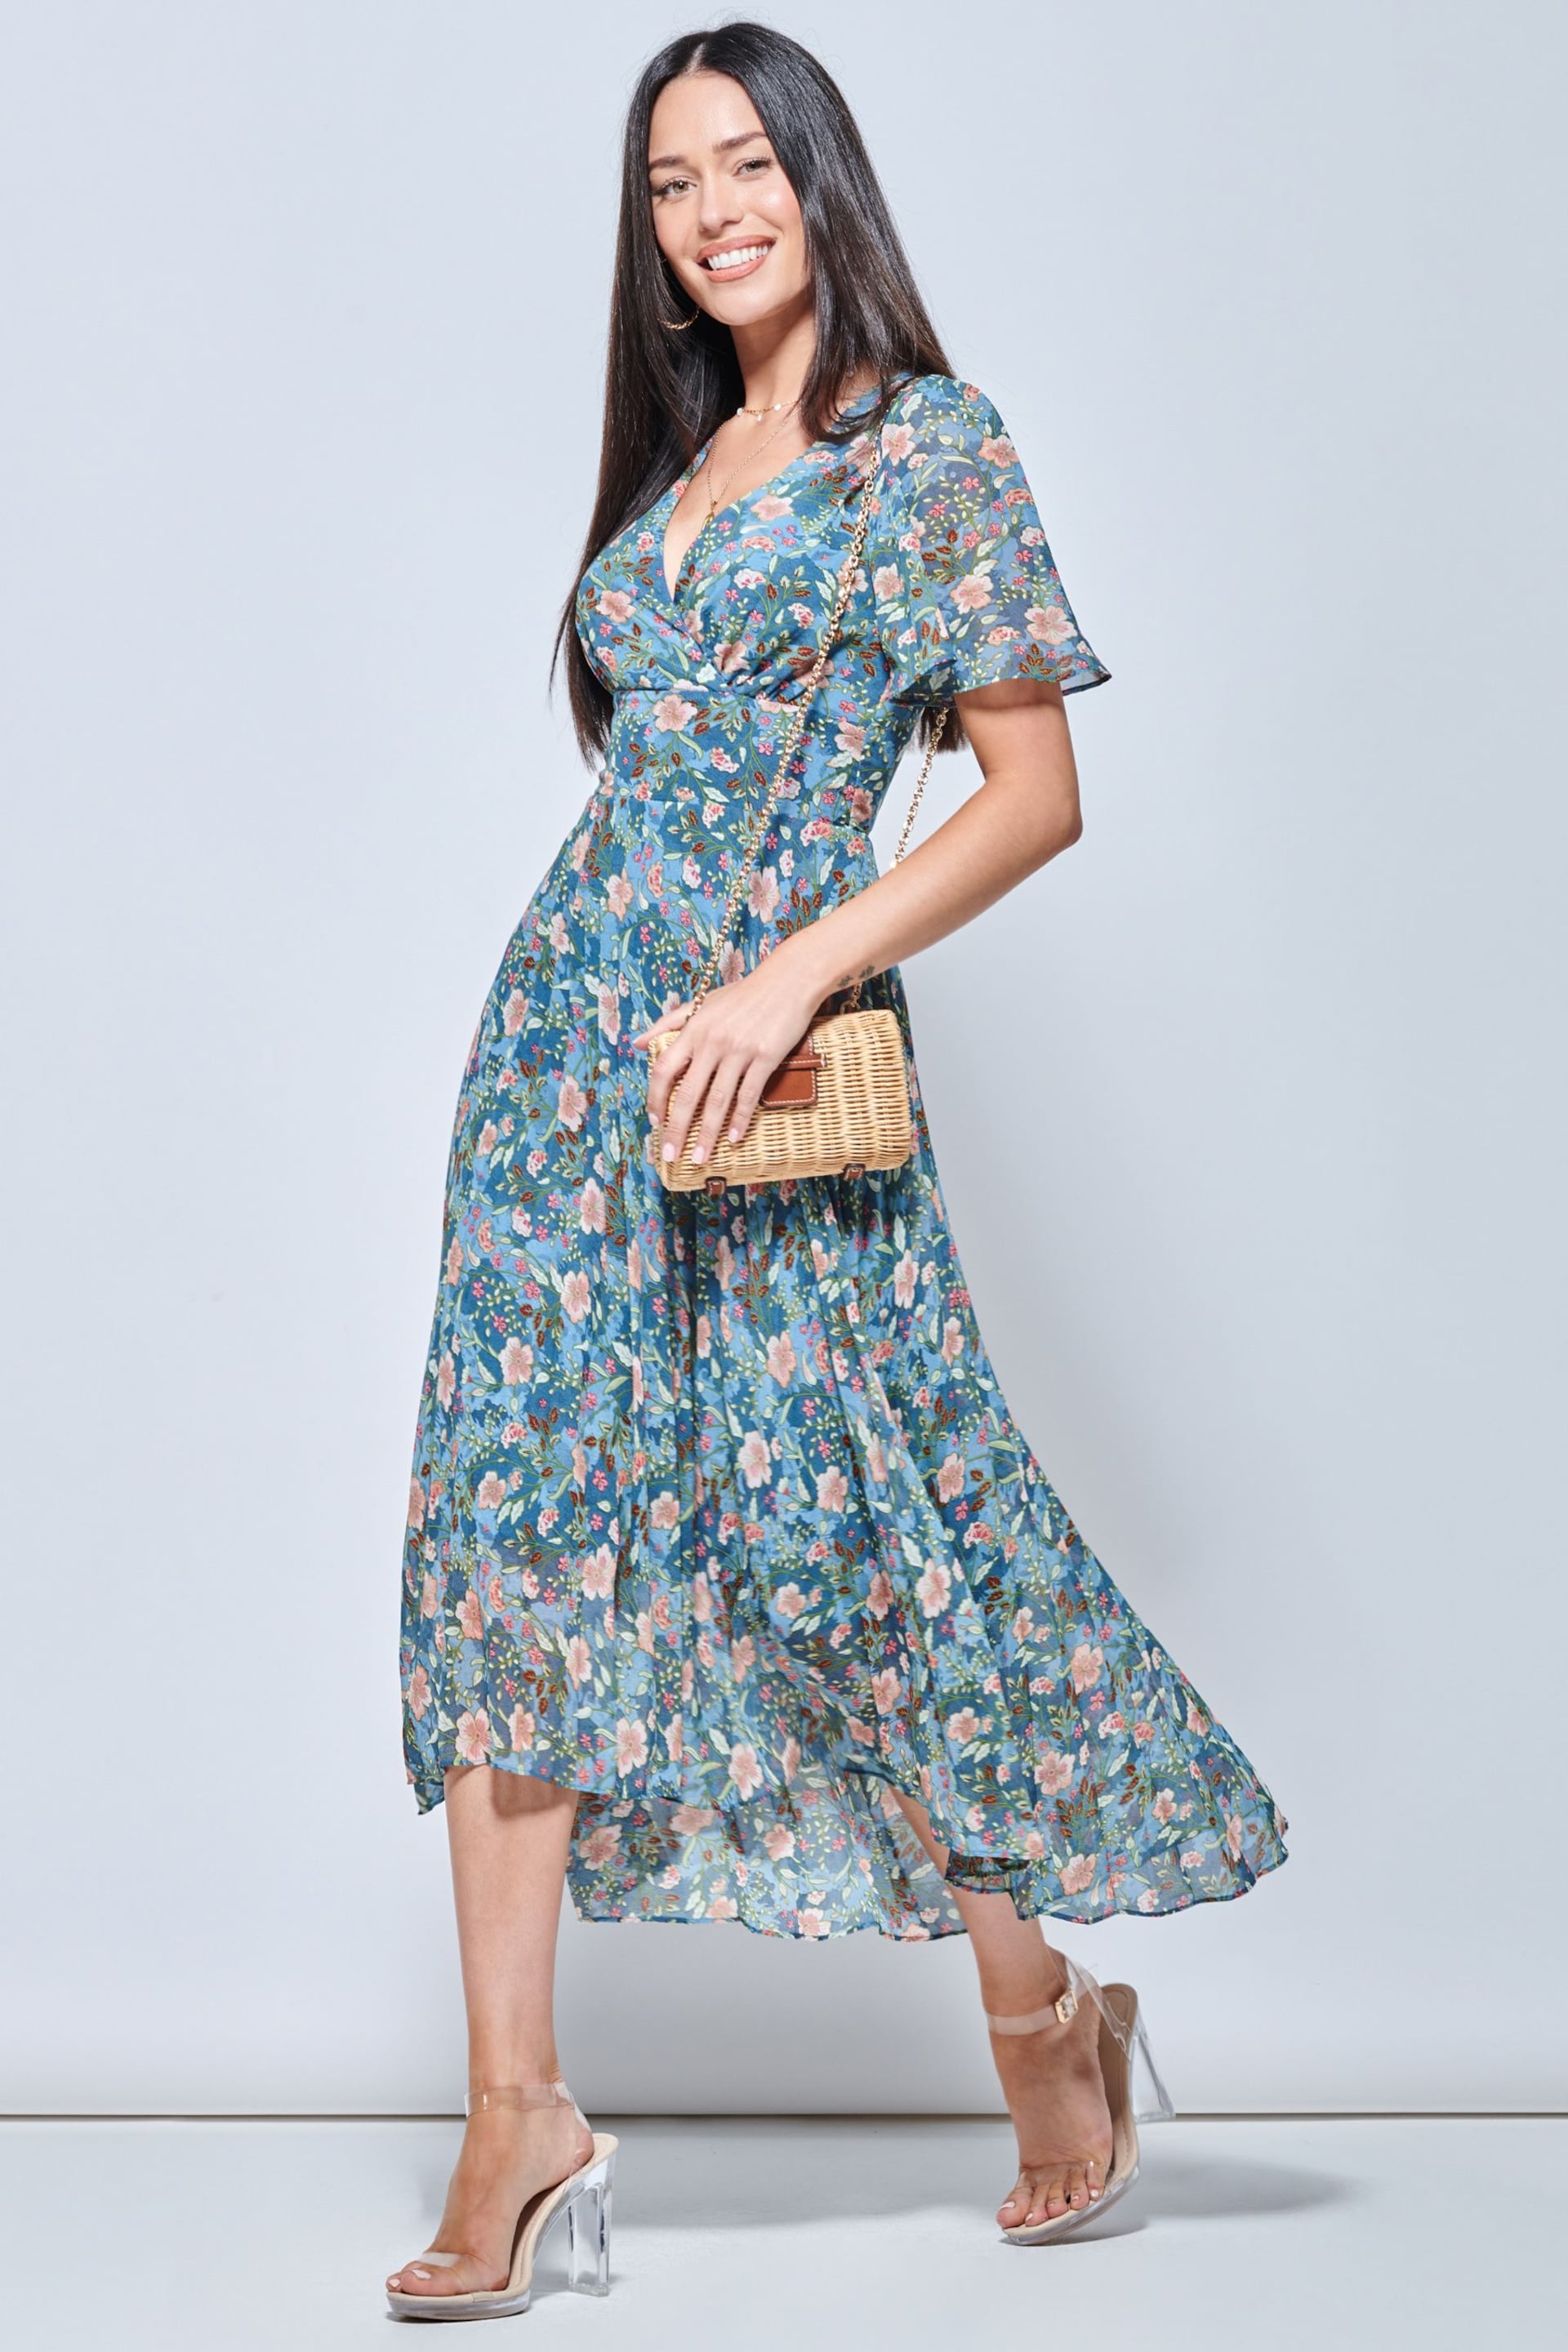 Jolie Moi Blue & Pink Floral Pleated Chiffon High Low Maxi Dress - Image 3 of 5